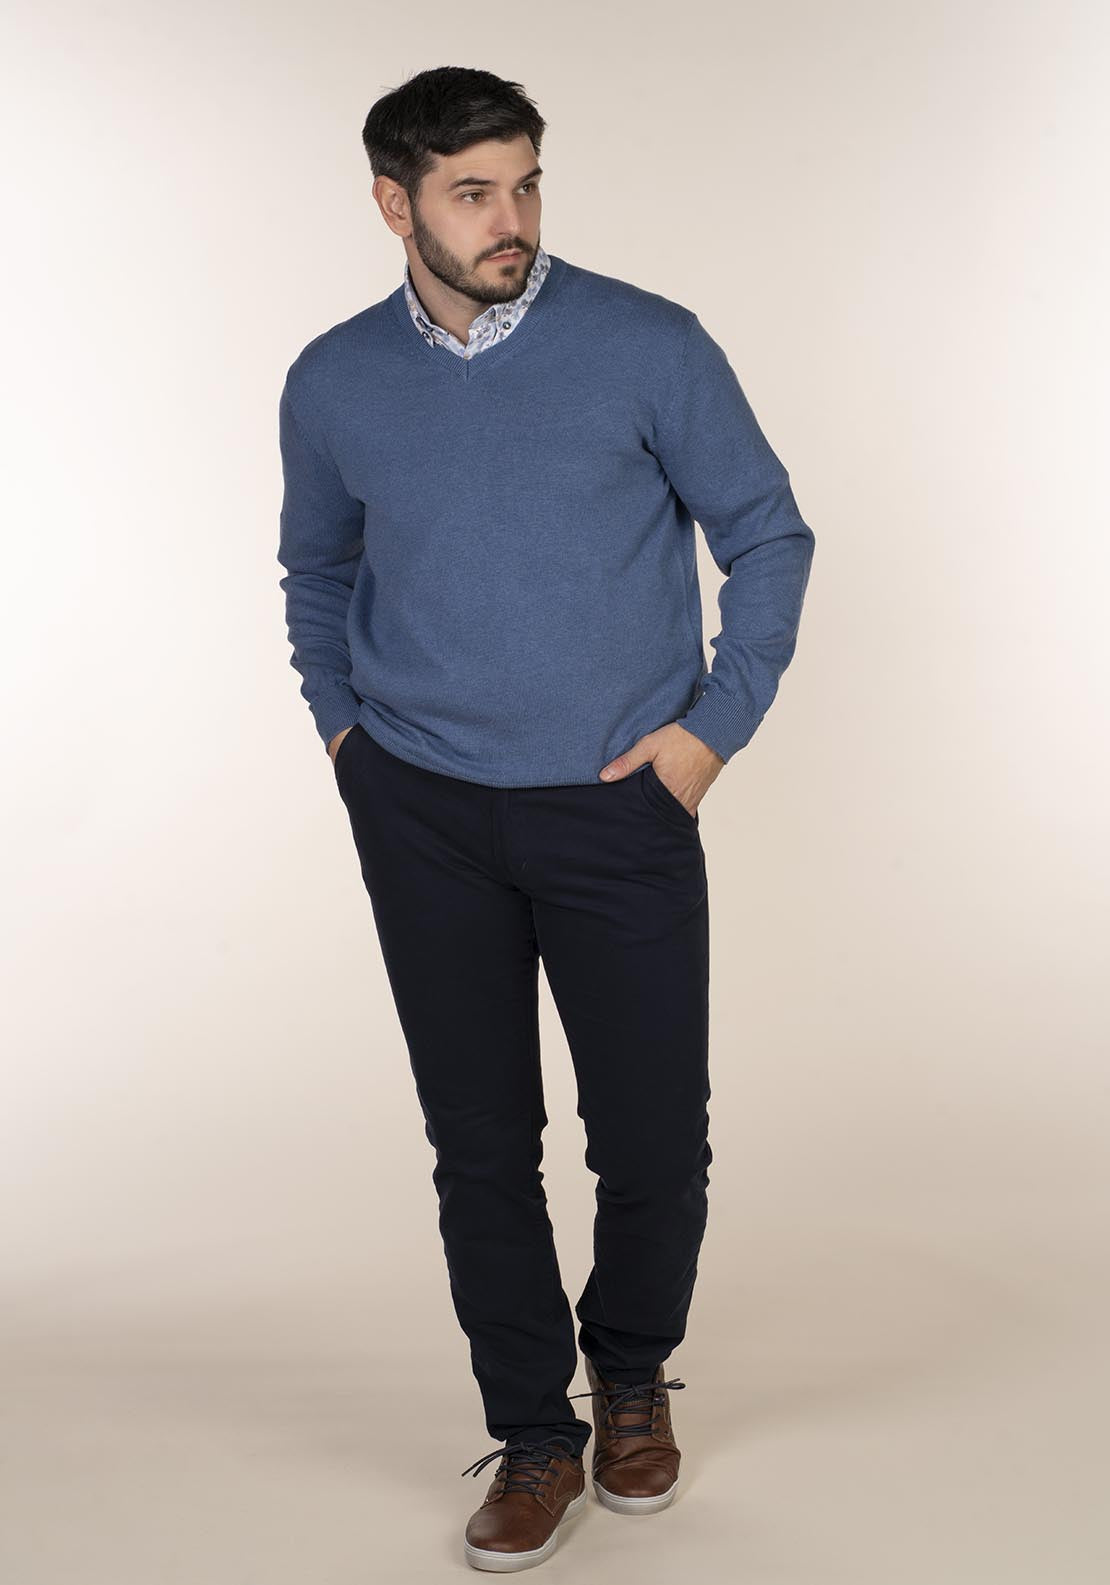 Yeats Plain Cotton V Neck Sweaters - Blue 4 Shaws Department Stores